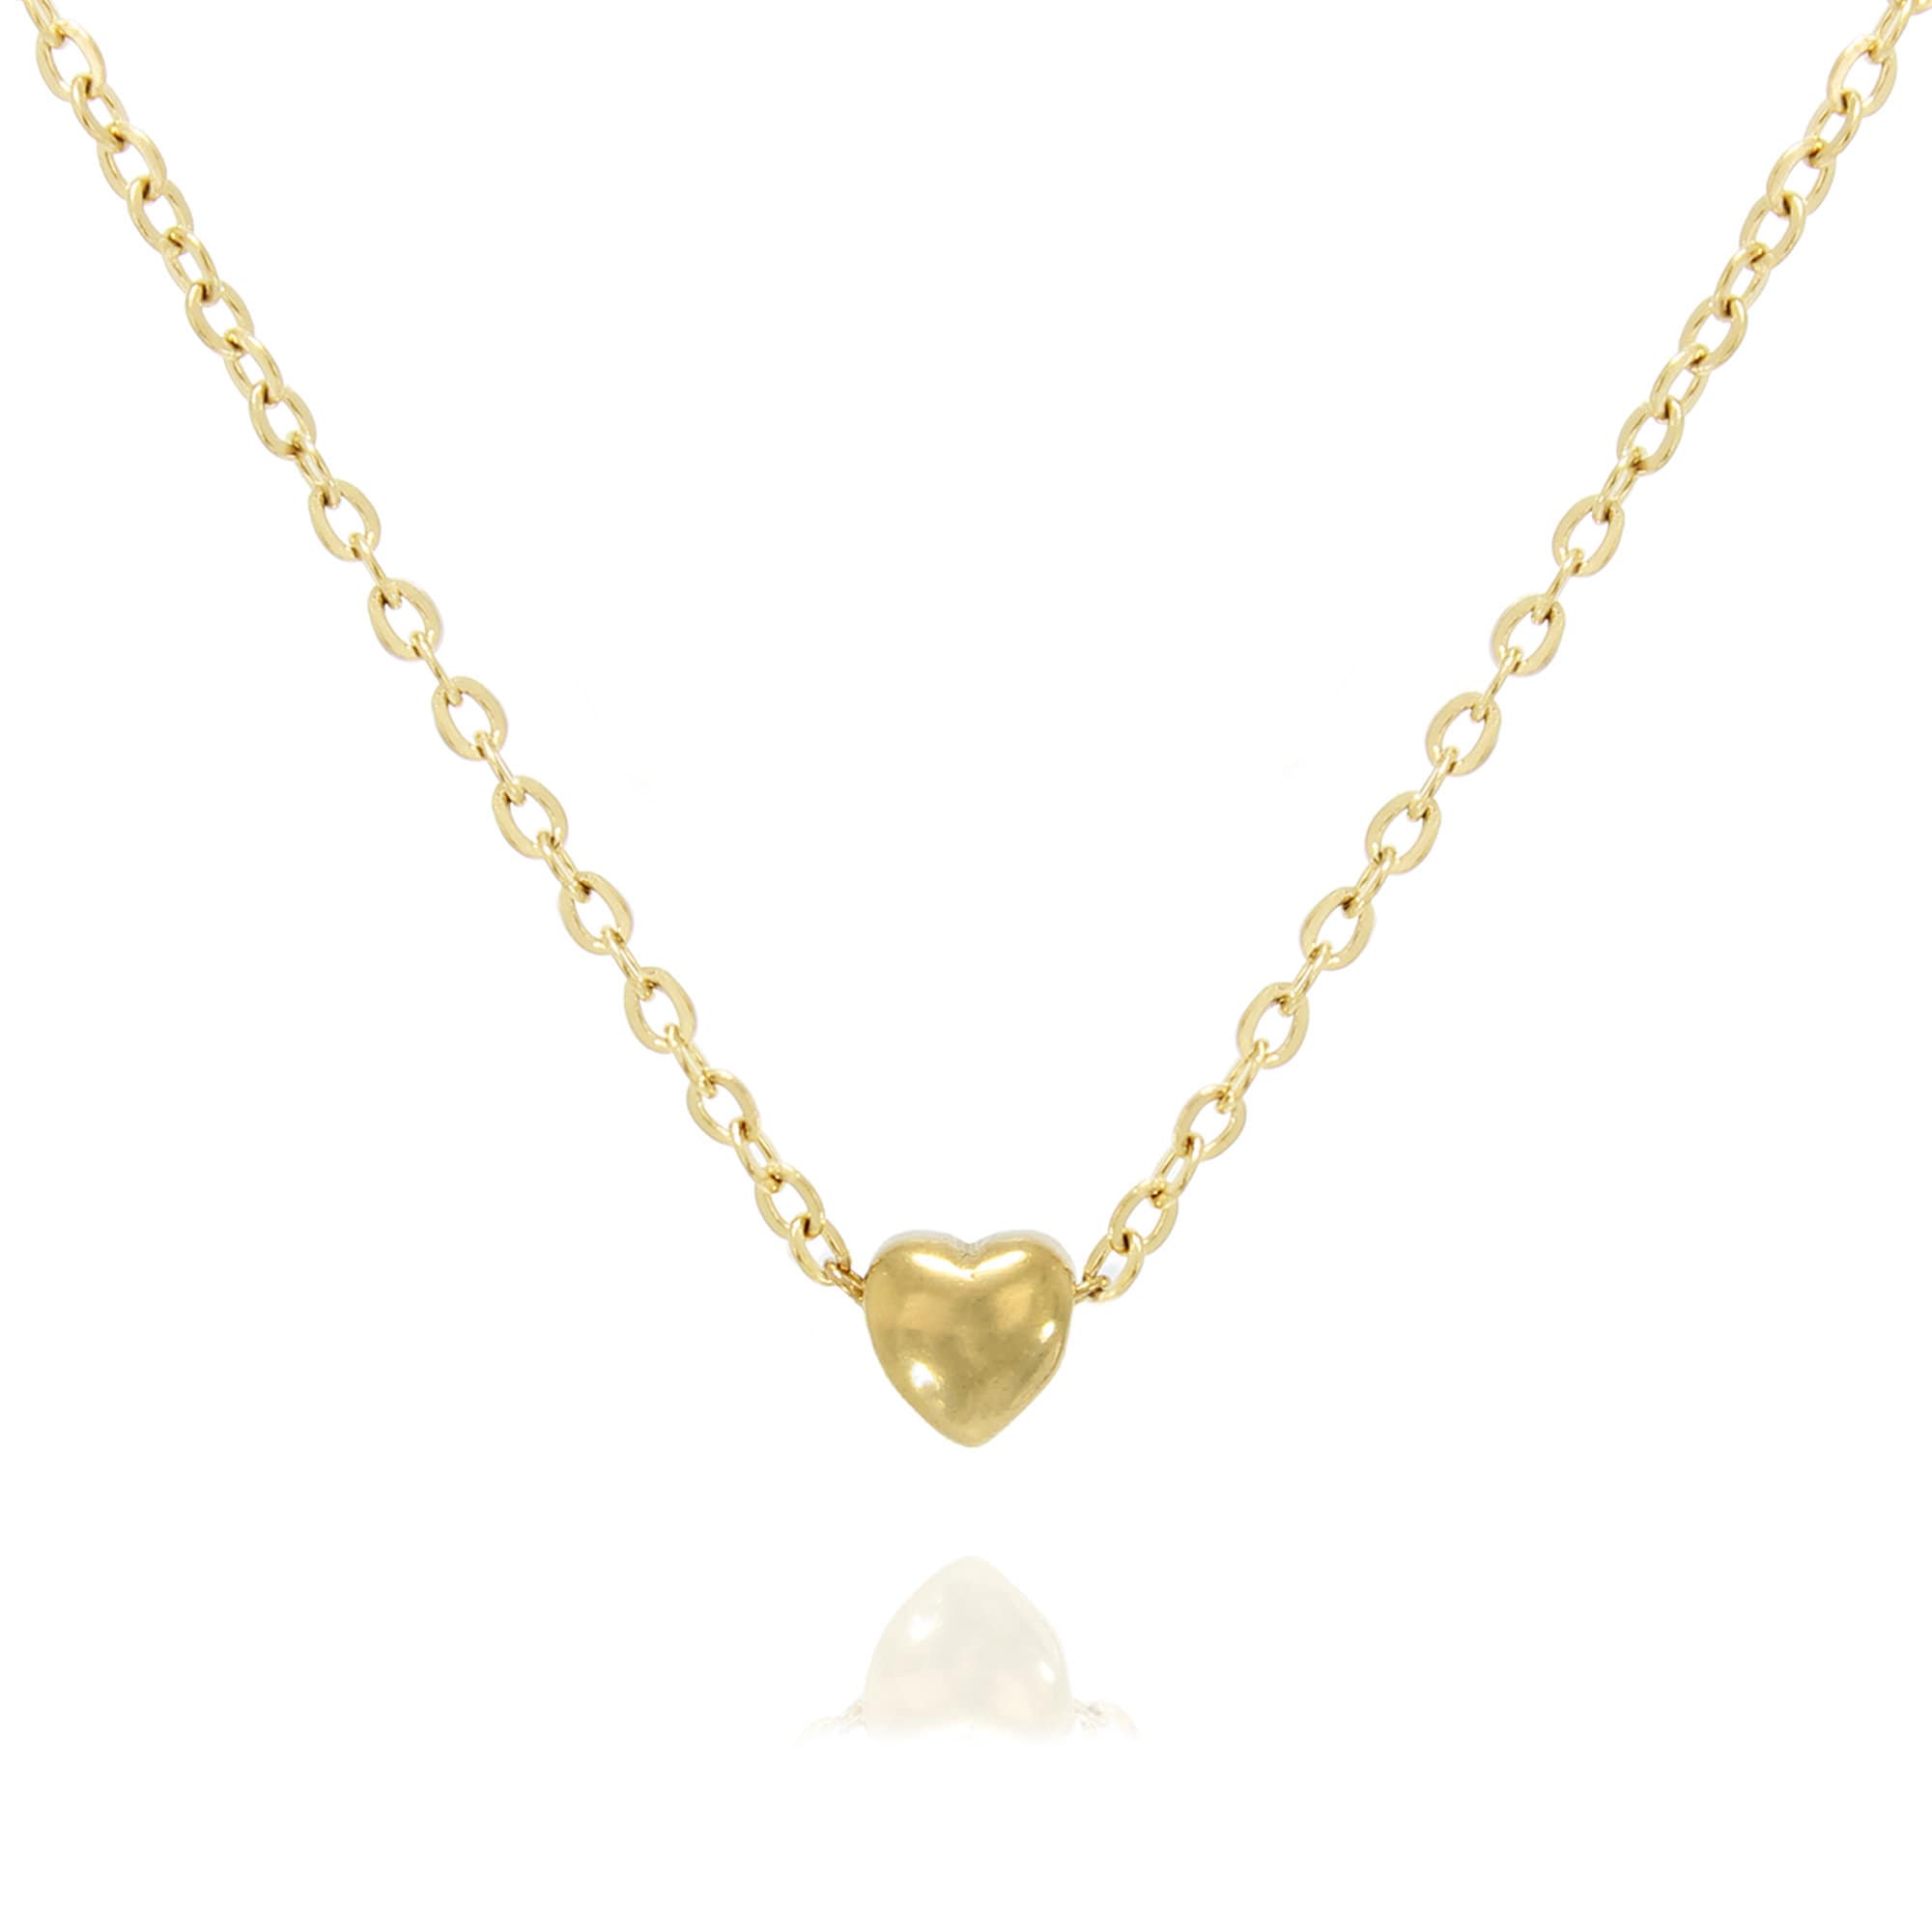  NVTHINH Heart Necklaces For Women Stainless Steel Gold